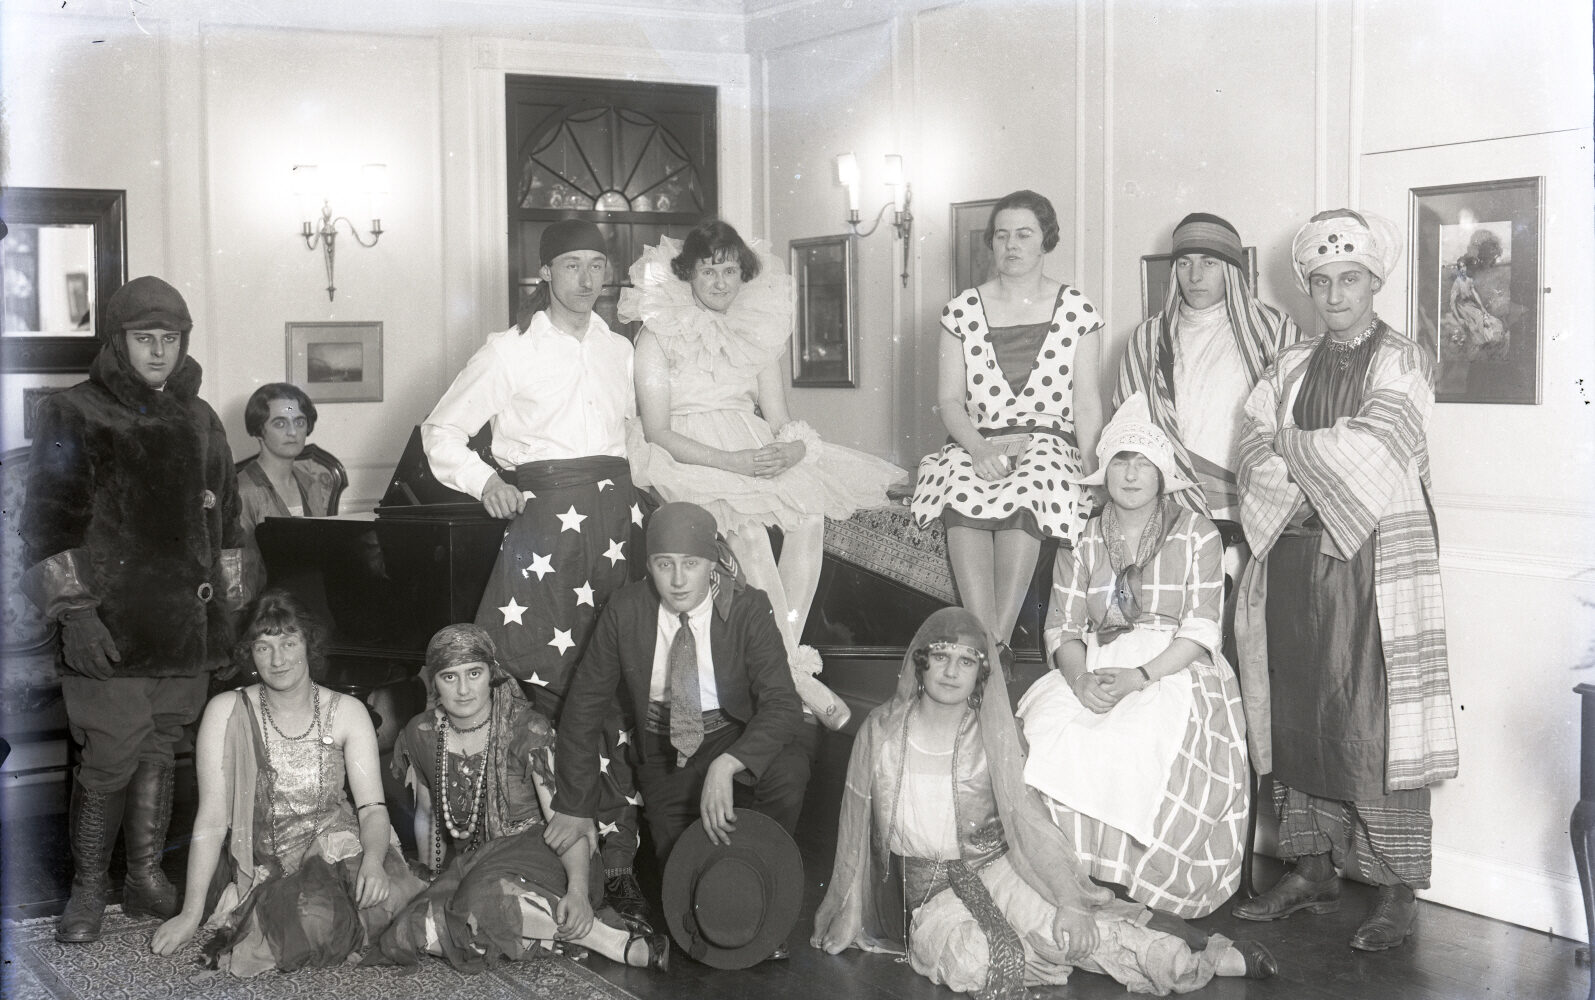 People dressed in costume for a fancy dress party